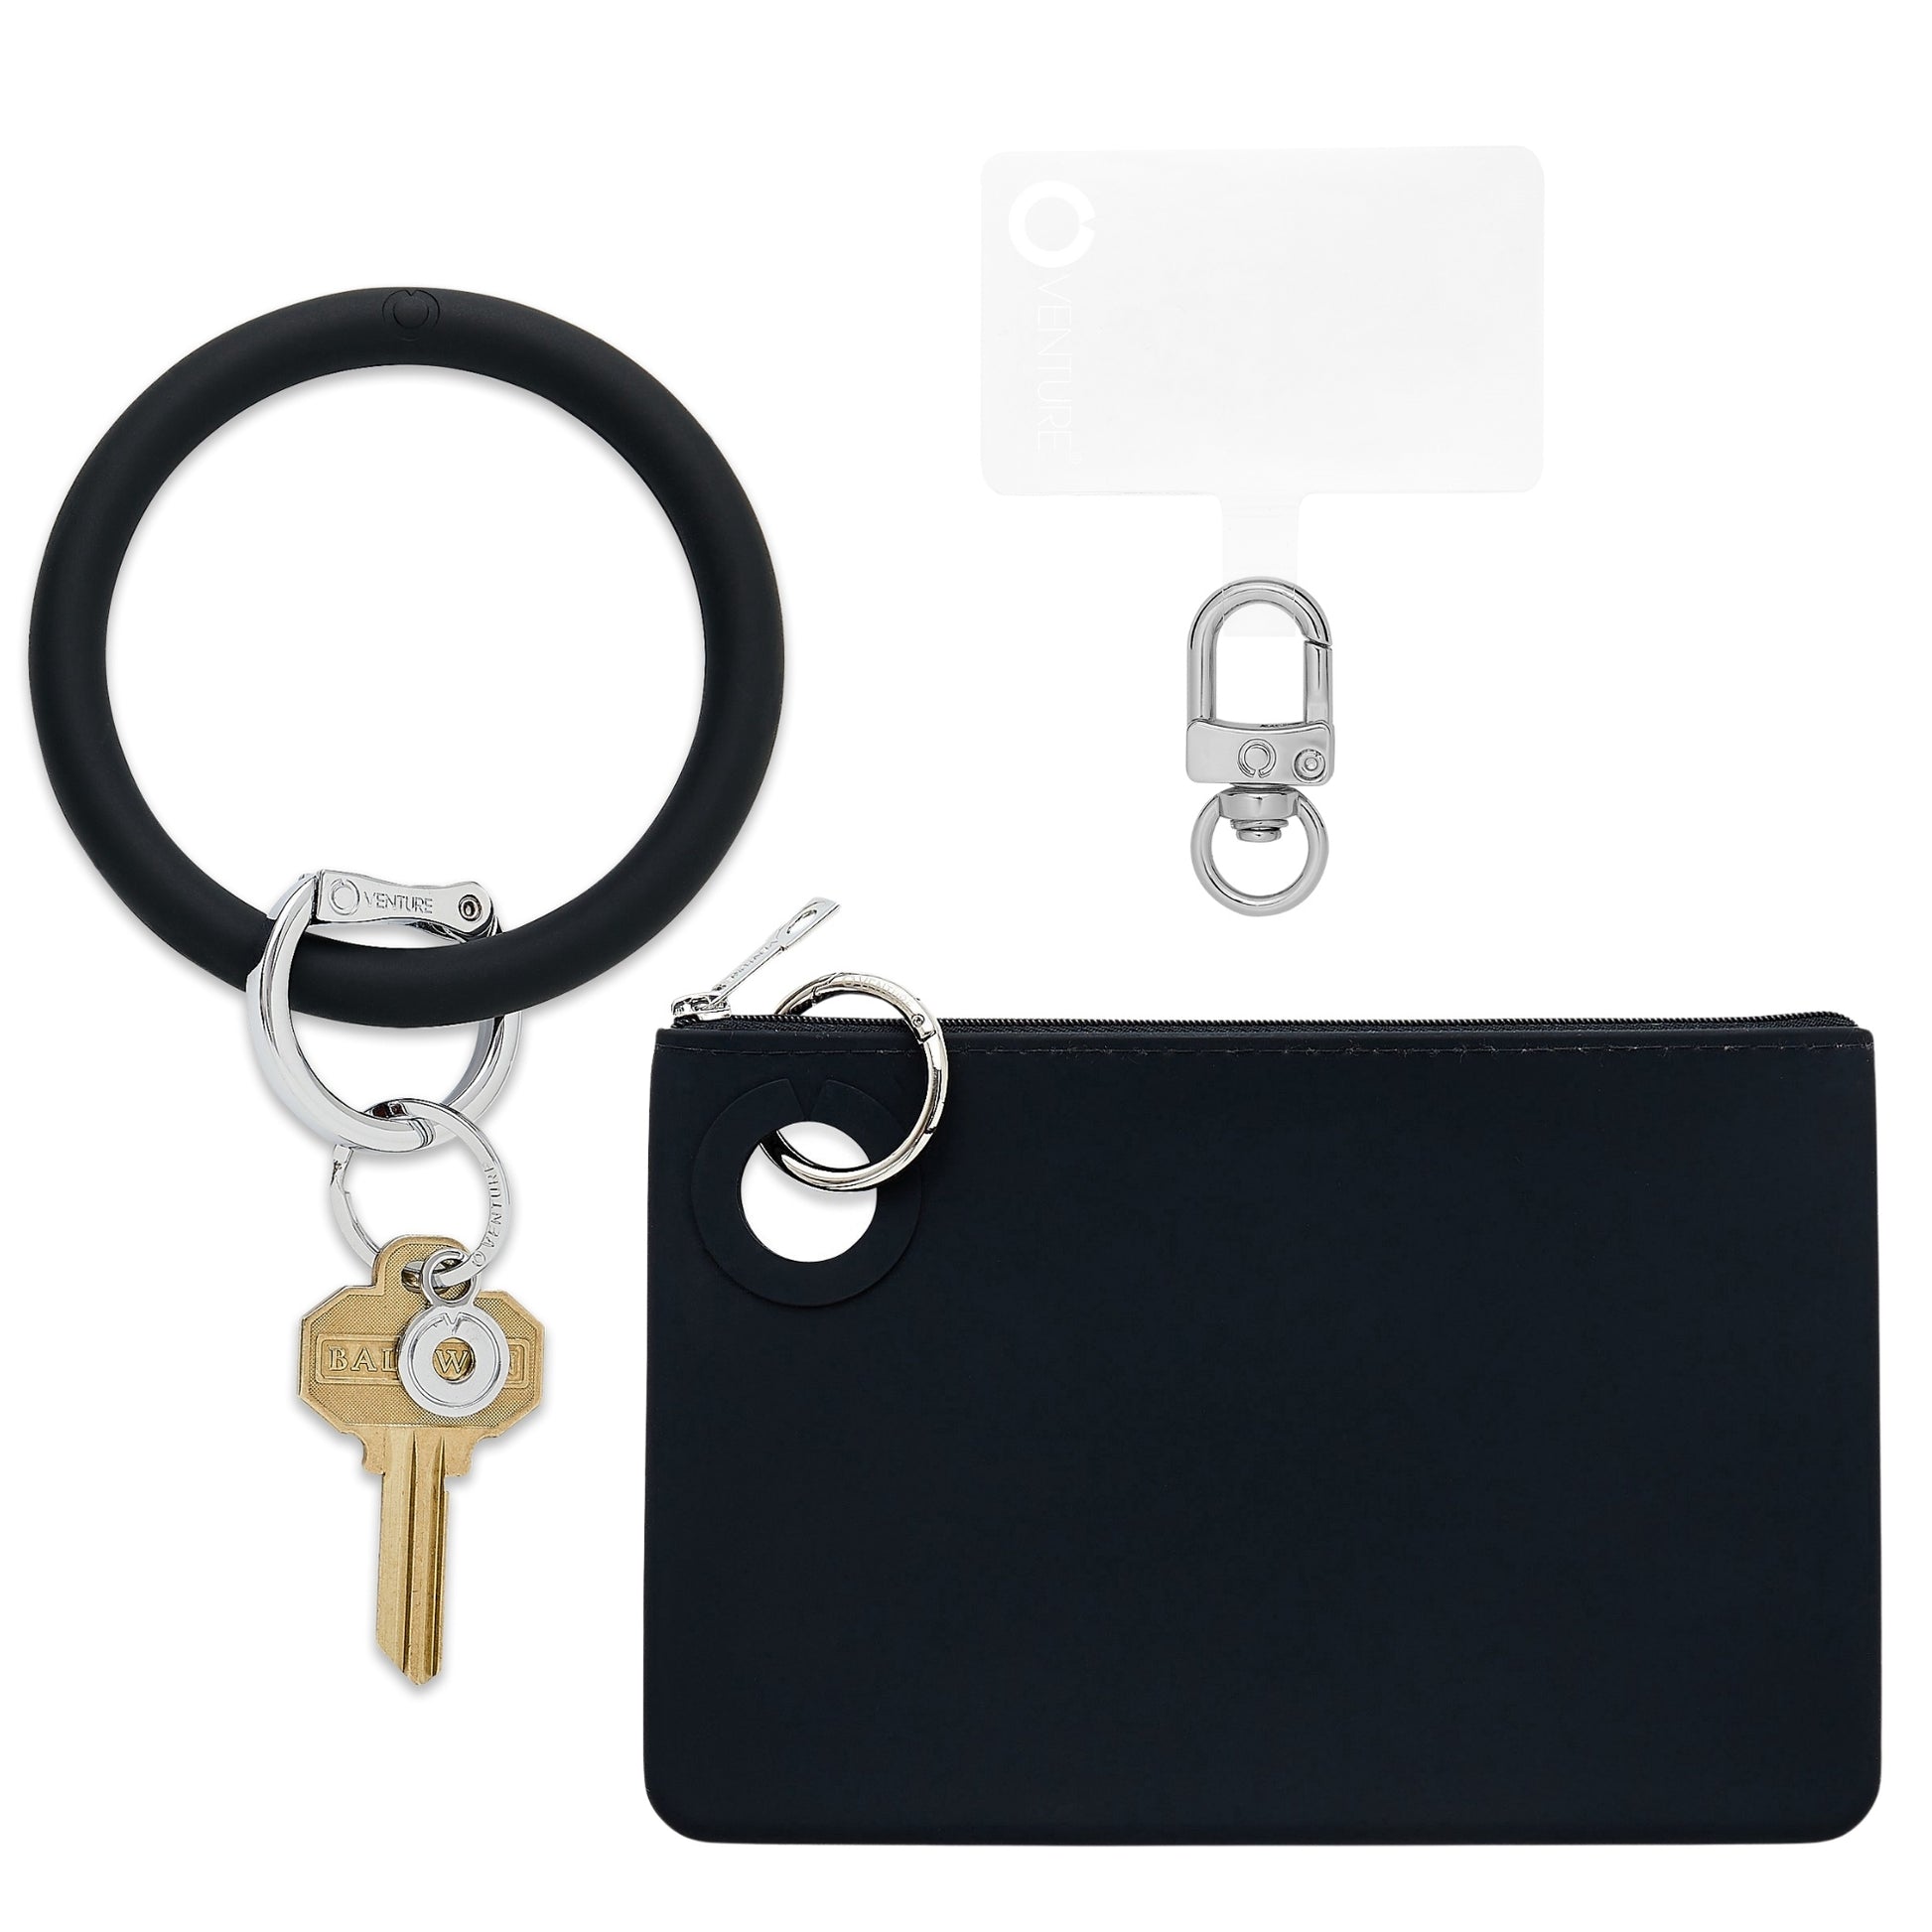 Stylish Large Pouch Wristlet with Phone Holder in black.